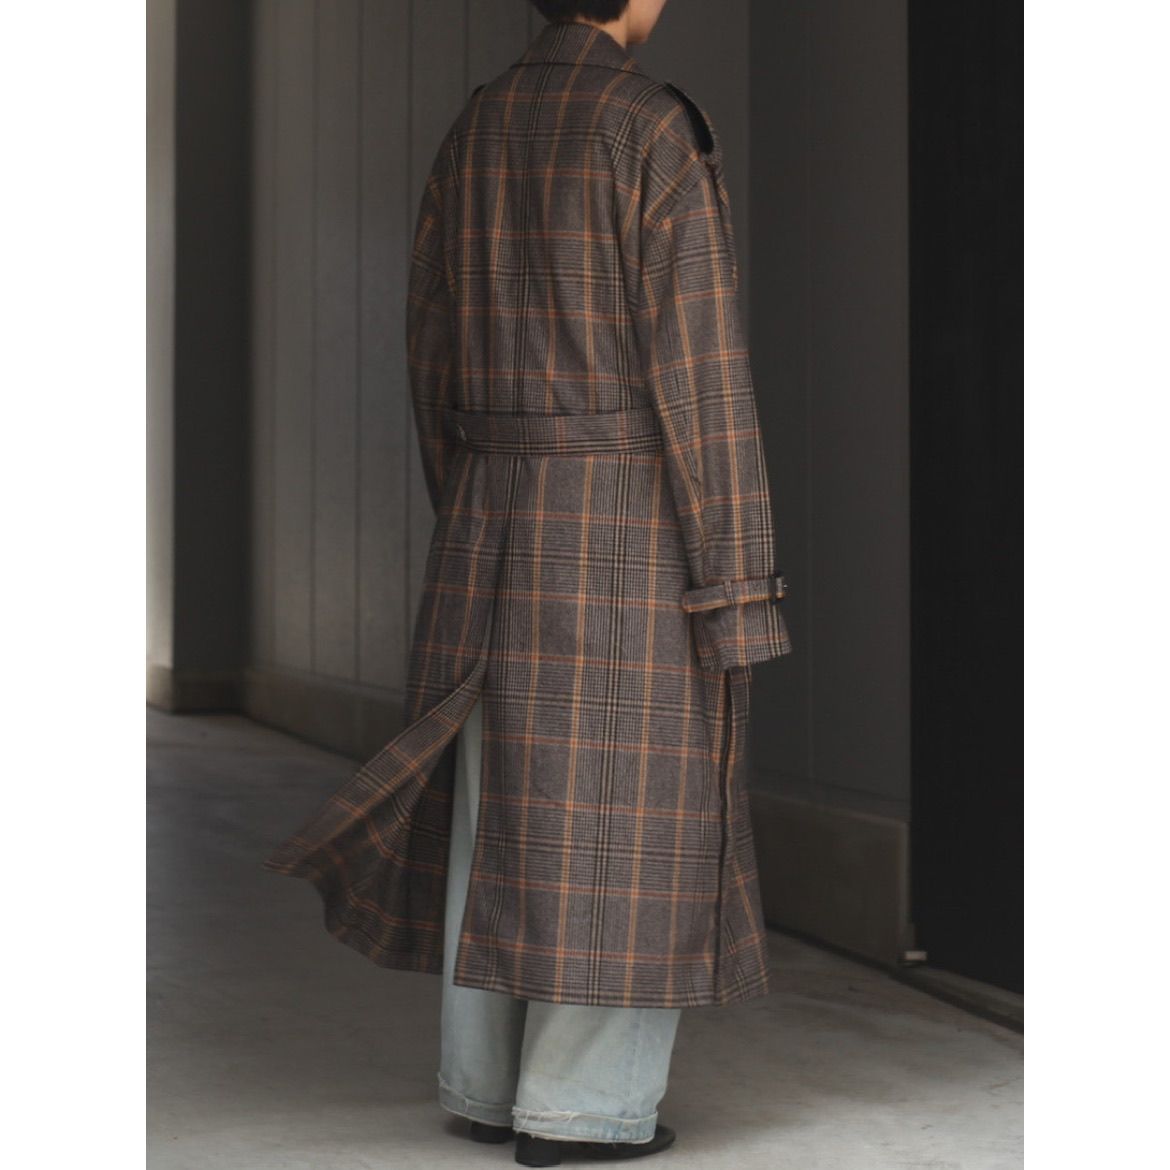 stein - 【残りわずか】Oversized Double Lapeled Trench Coat 